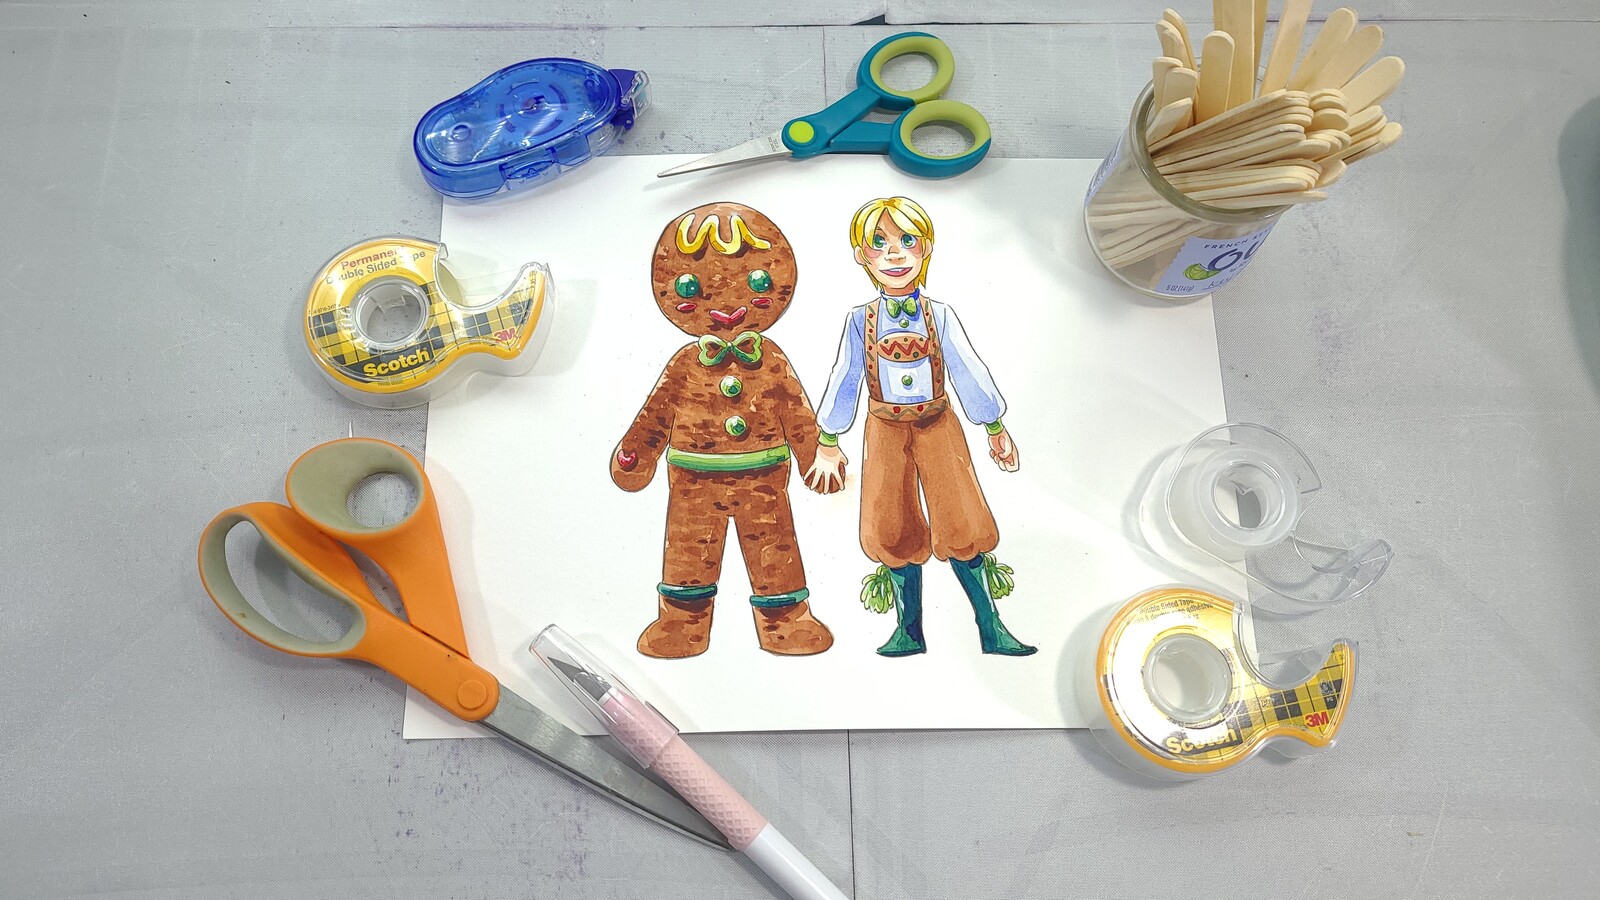 Papercraftmas Day 4: Gingerbread Boys with materials used for assembly